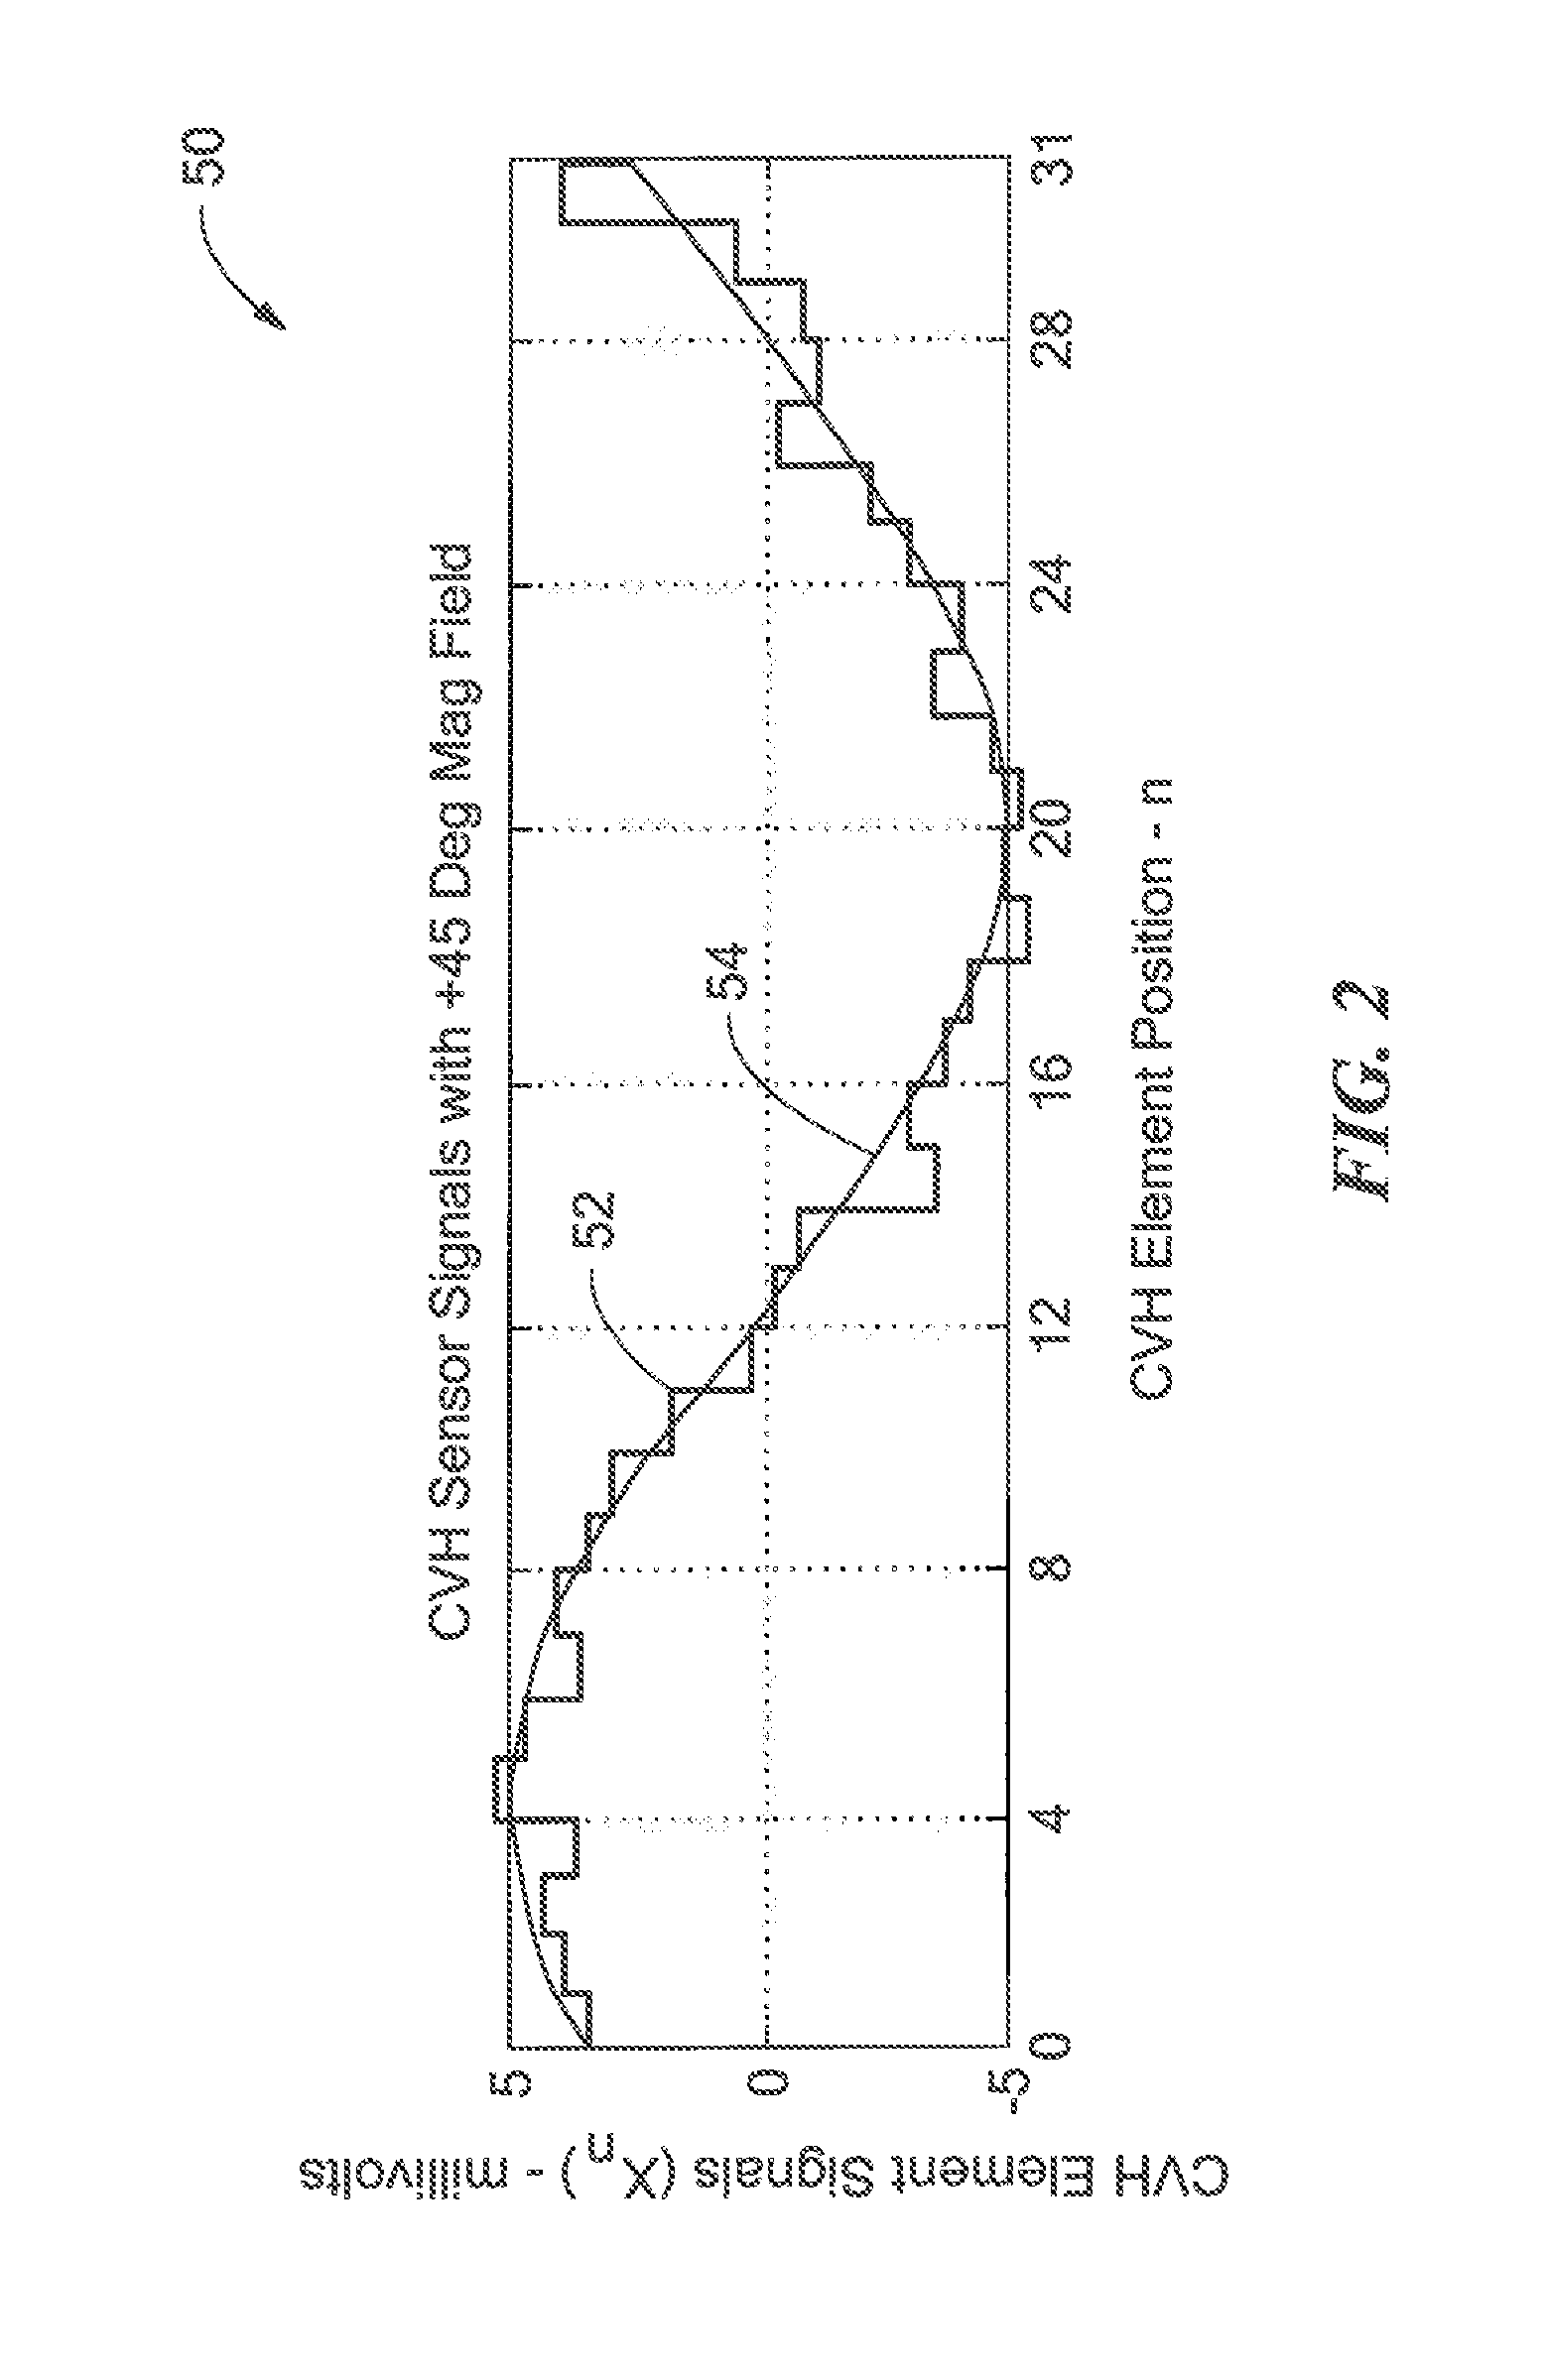 Circular vertical hall magnetic field sensing element and method with a plurality of continuous output signals